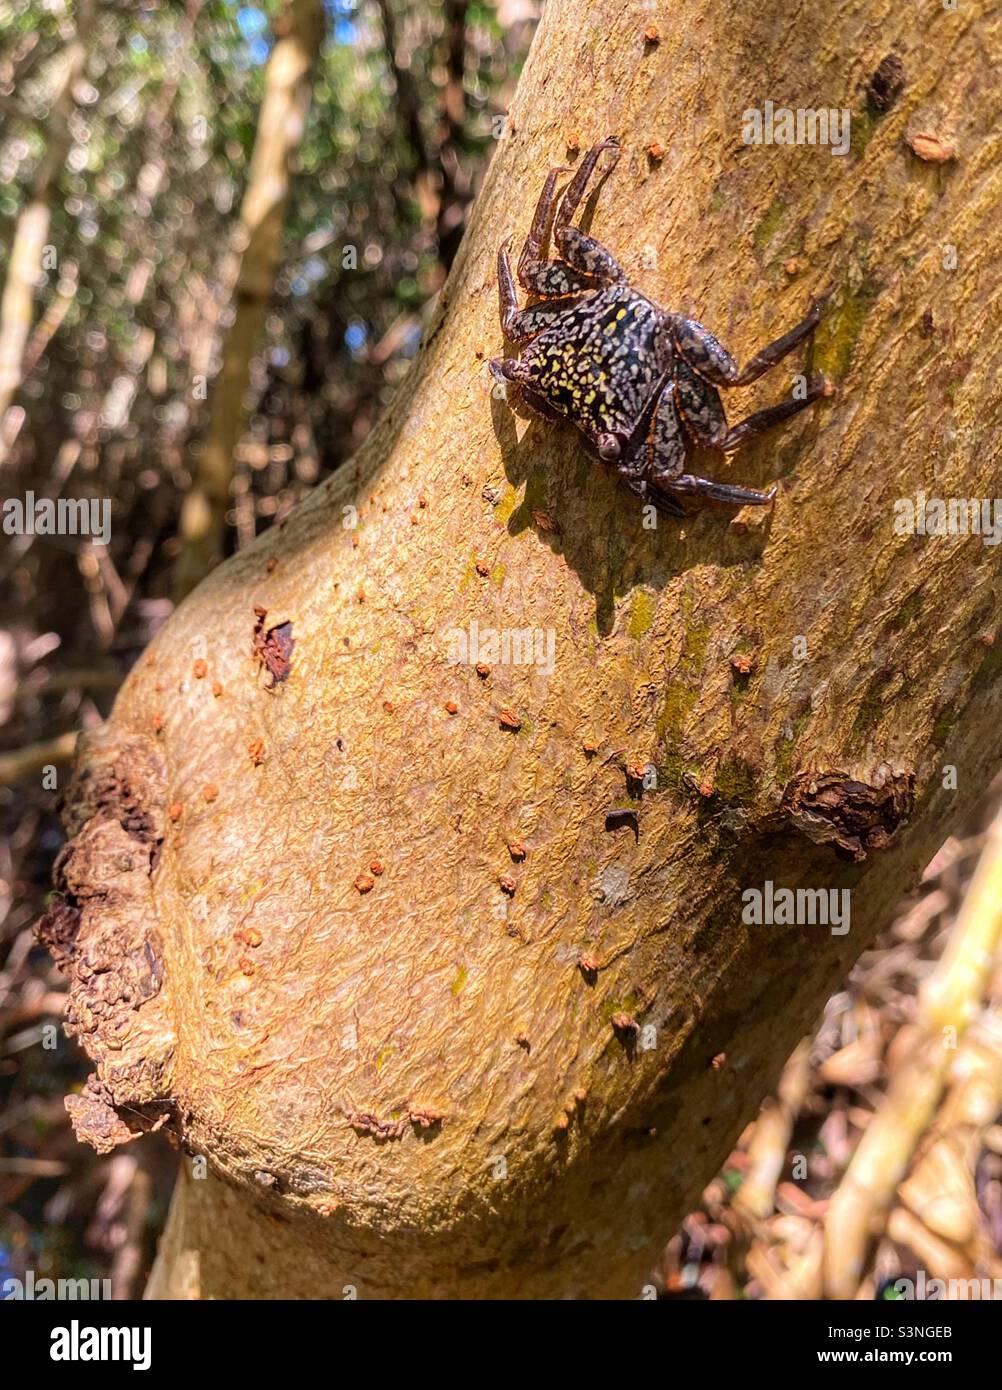 Small tree crab in the Ding Darling reserve in Sanibel Island Florida. Stock Photo